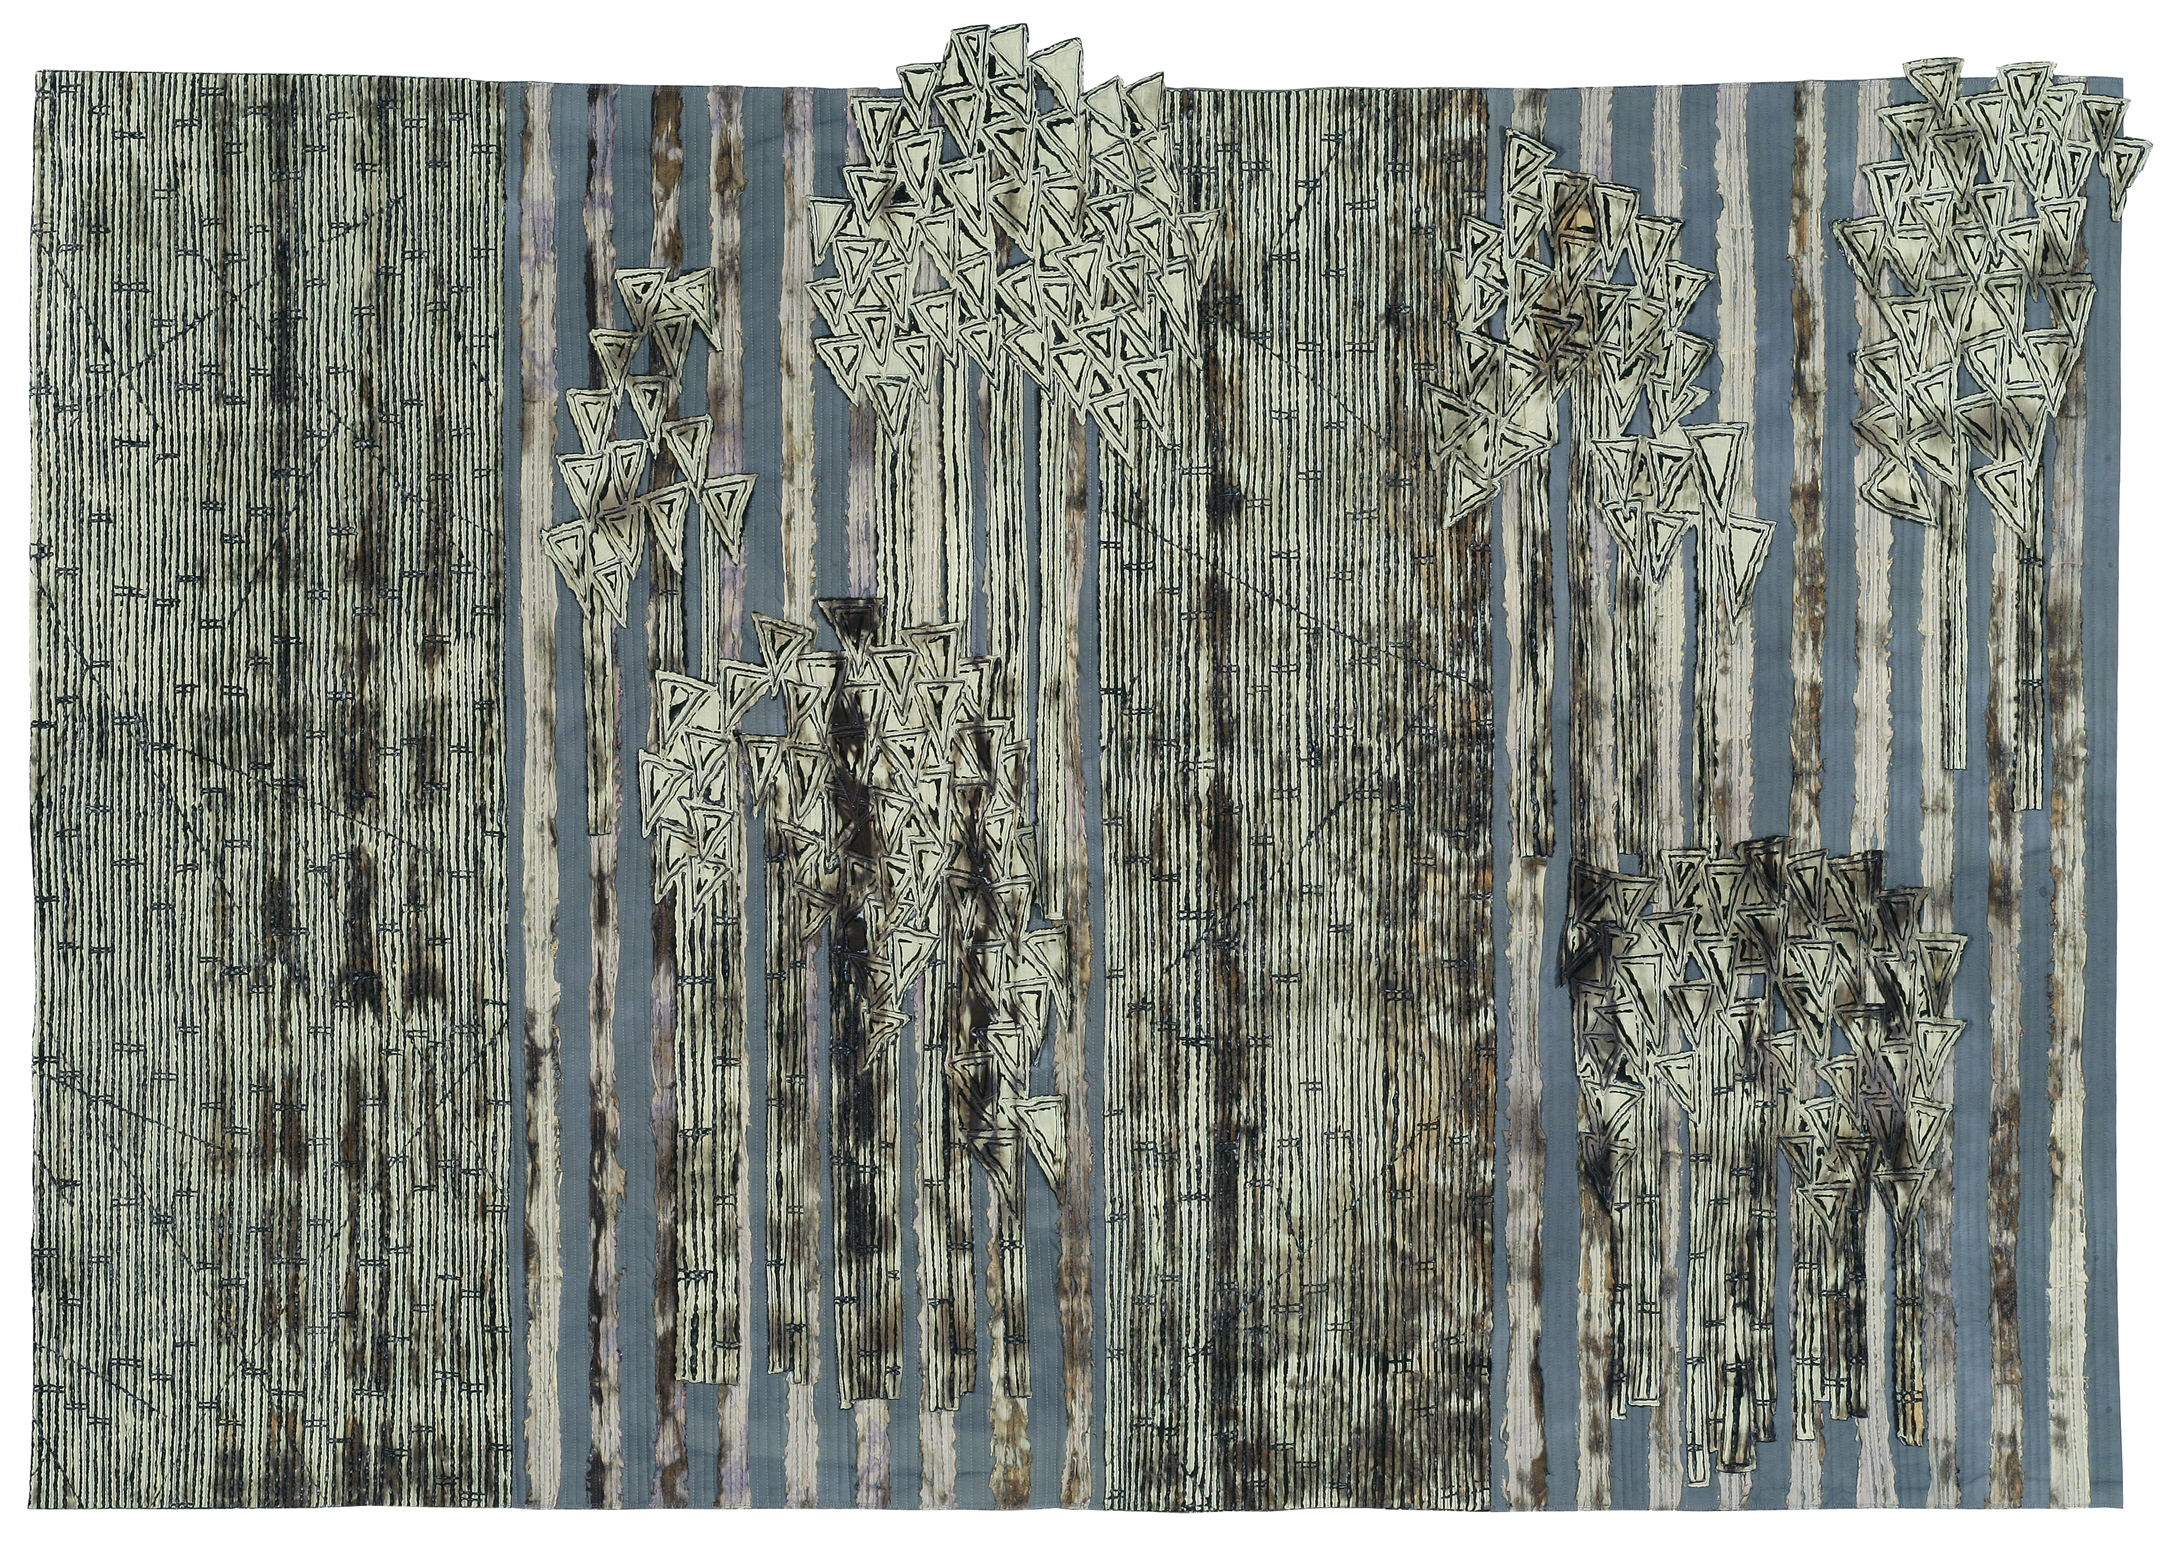 Work by textile artist and quilter Annette Morgan - Beth Chatto's Bamboo II Annette Morgan (photography by Kevin Mead of Art Van Go)